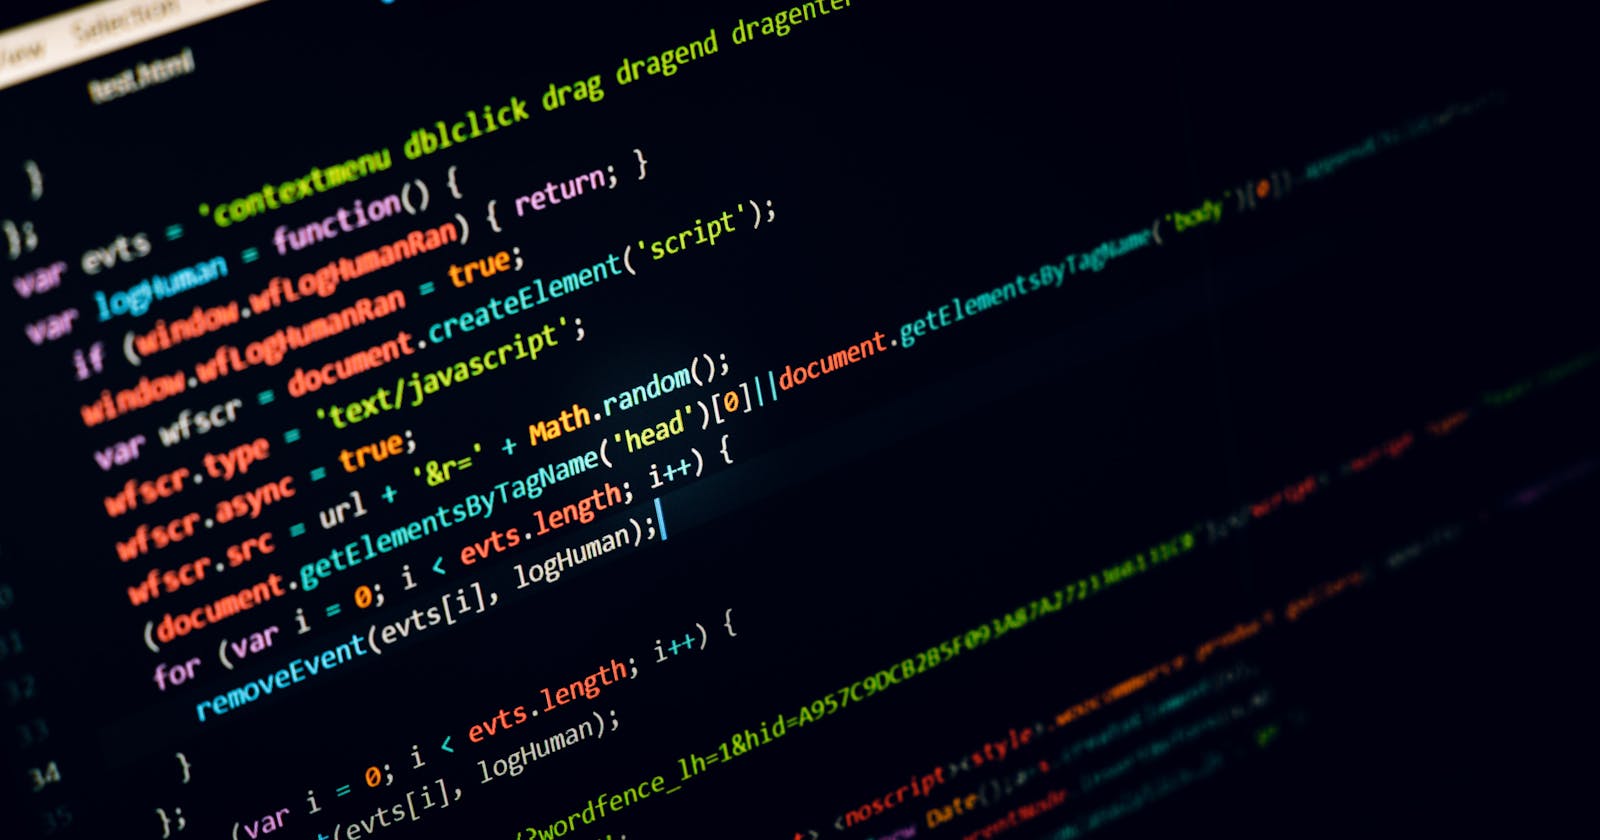 7 things to keep in mind to become a web developer